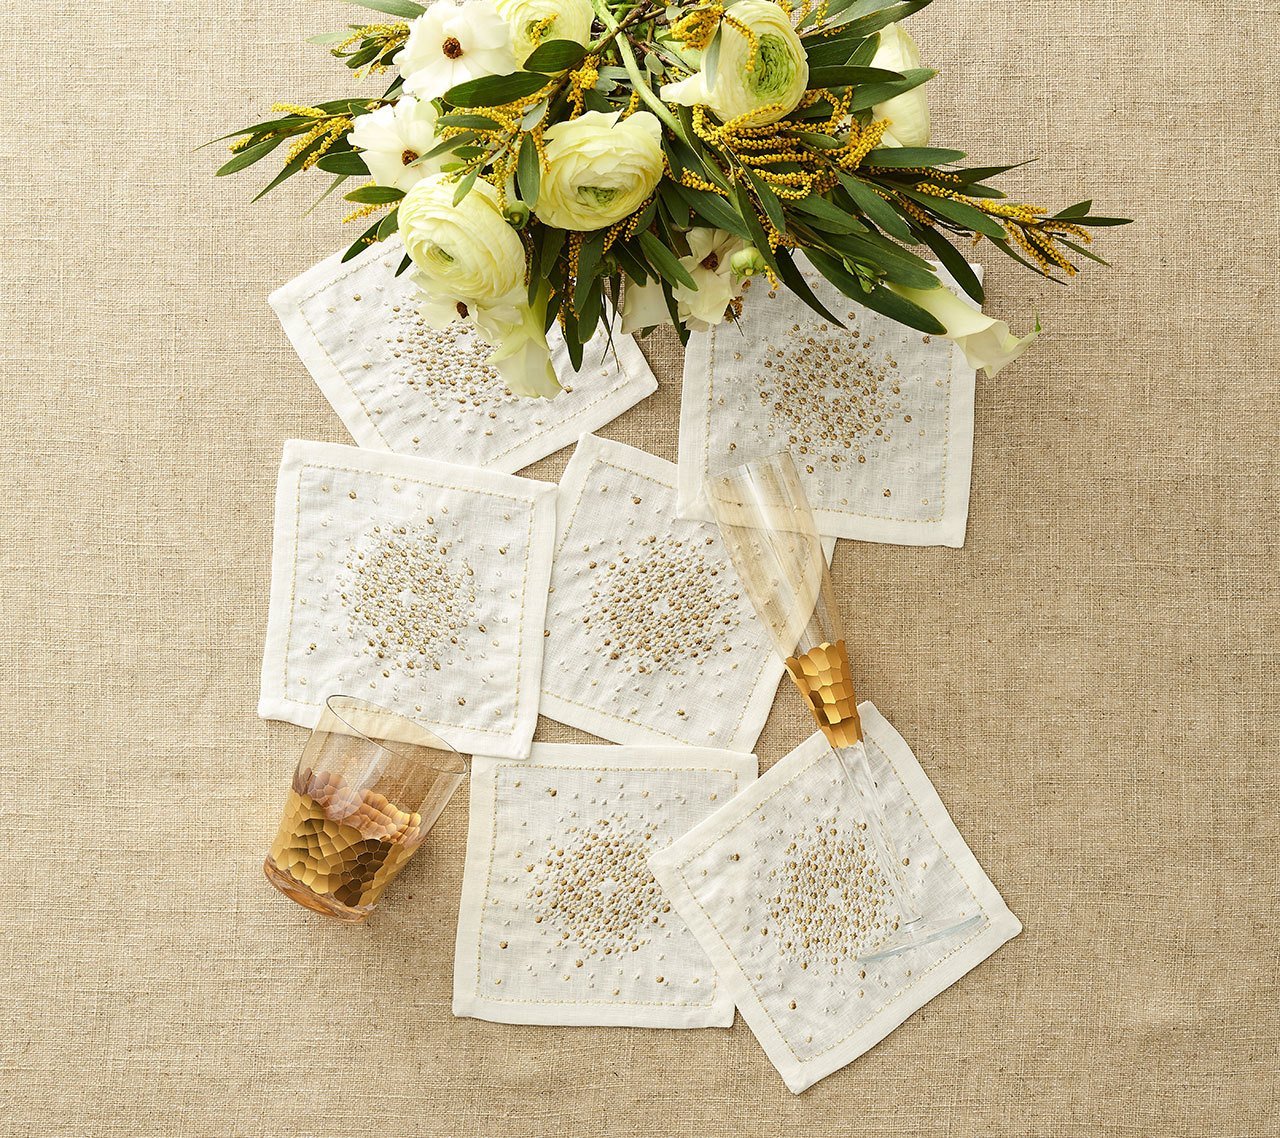  Luxury Starburst Cocktail Napkins in white, gold & silver, shown with a floral arrangement and gold wine glasses